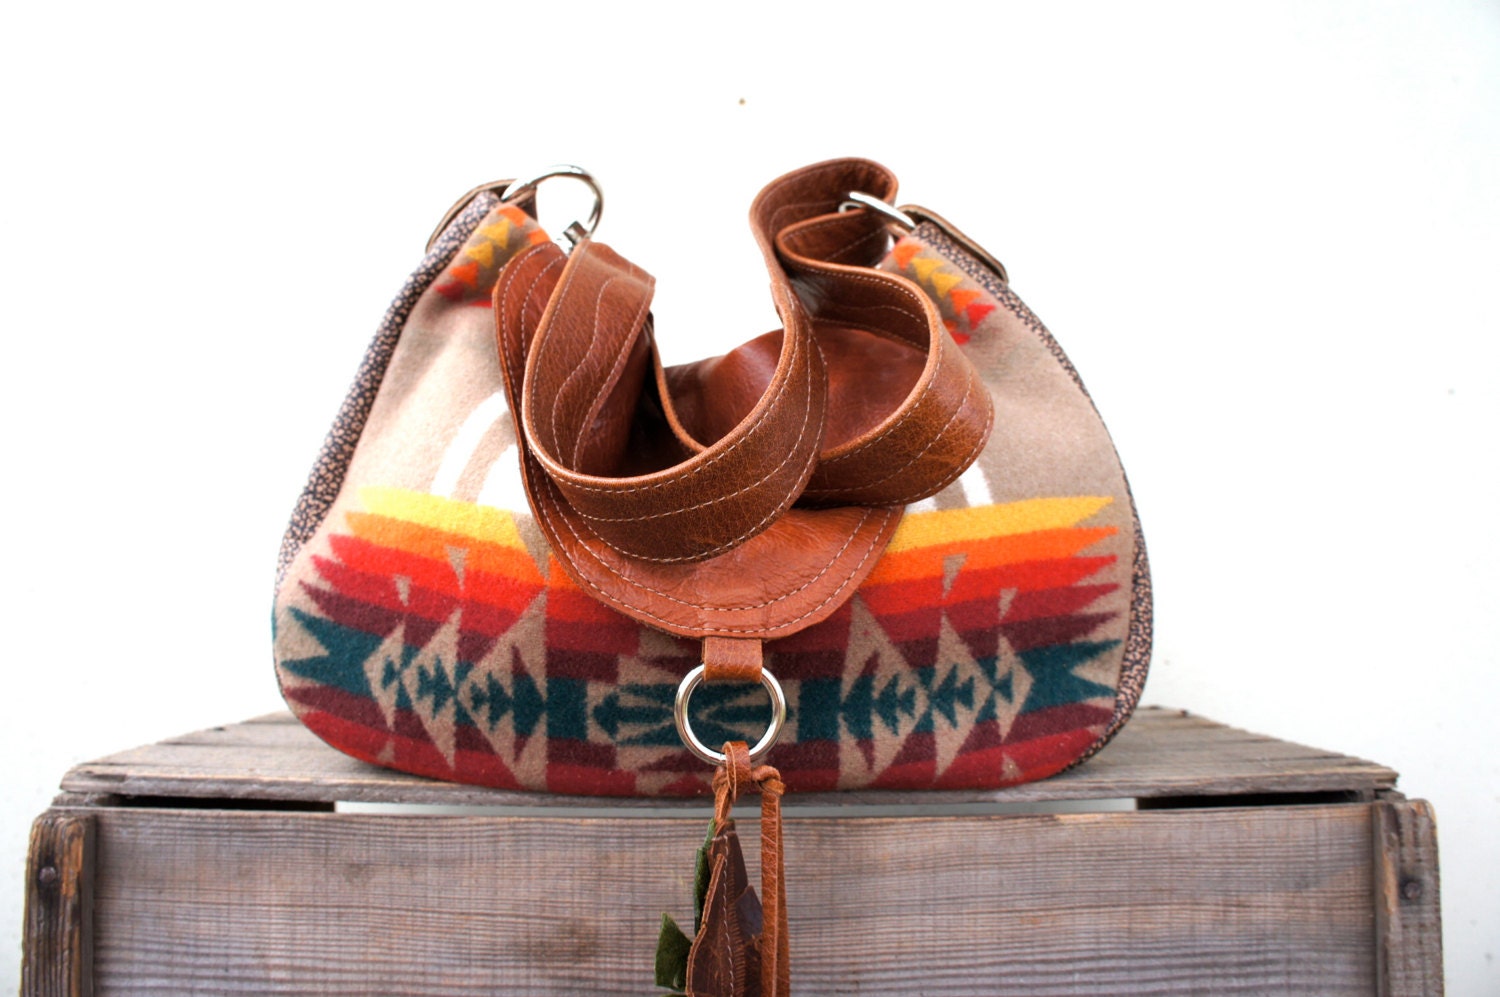 SALE 15% OFF//LAVINIA/// in "Chief Joseph" Pendleton Wool and Brown Leathers with Two-Way Strap - arebycdesign